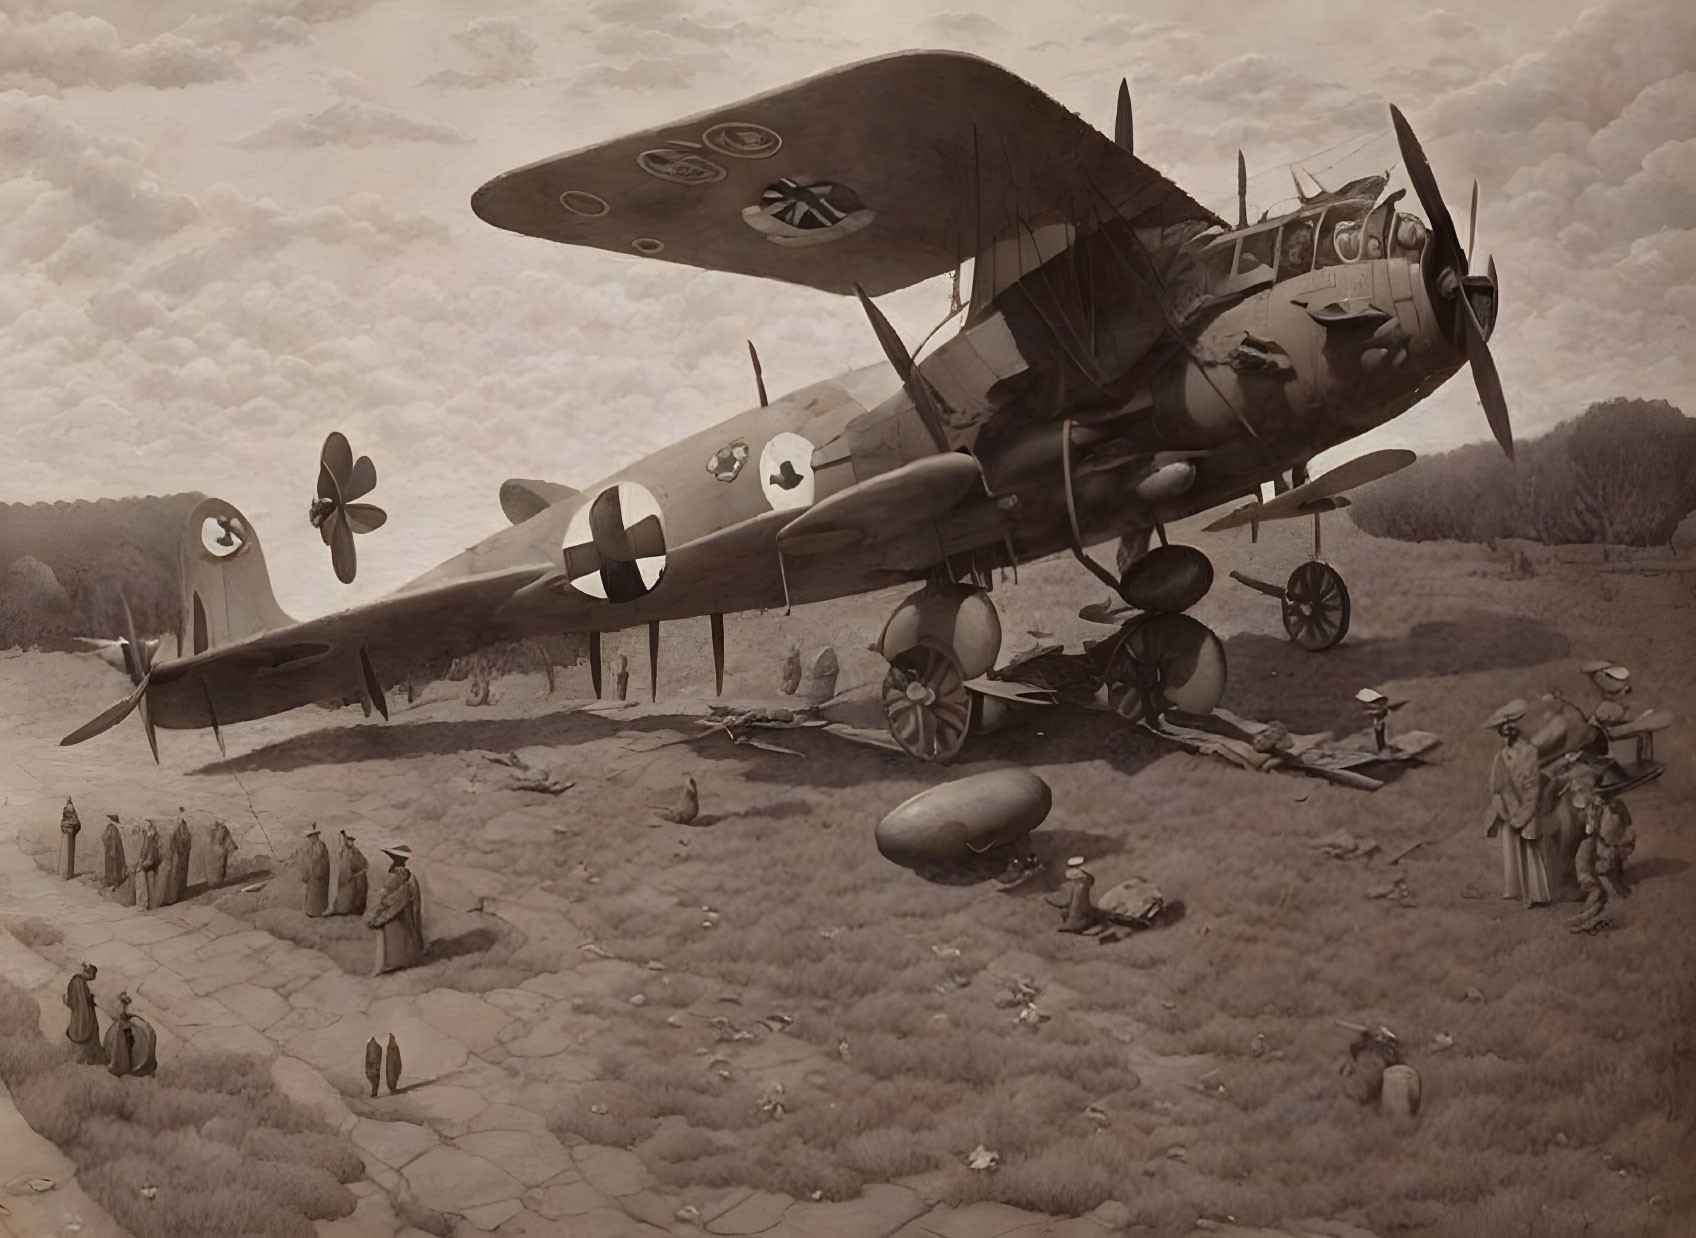 Vintage Military Aircraft and People in Period Clothing in Sepia-Tone